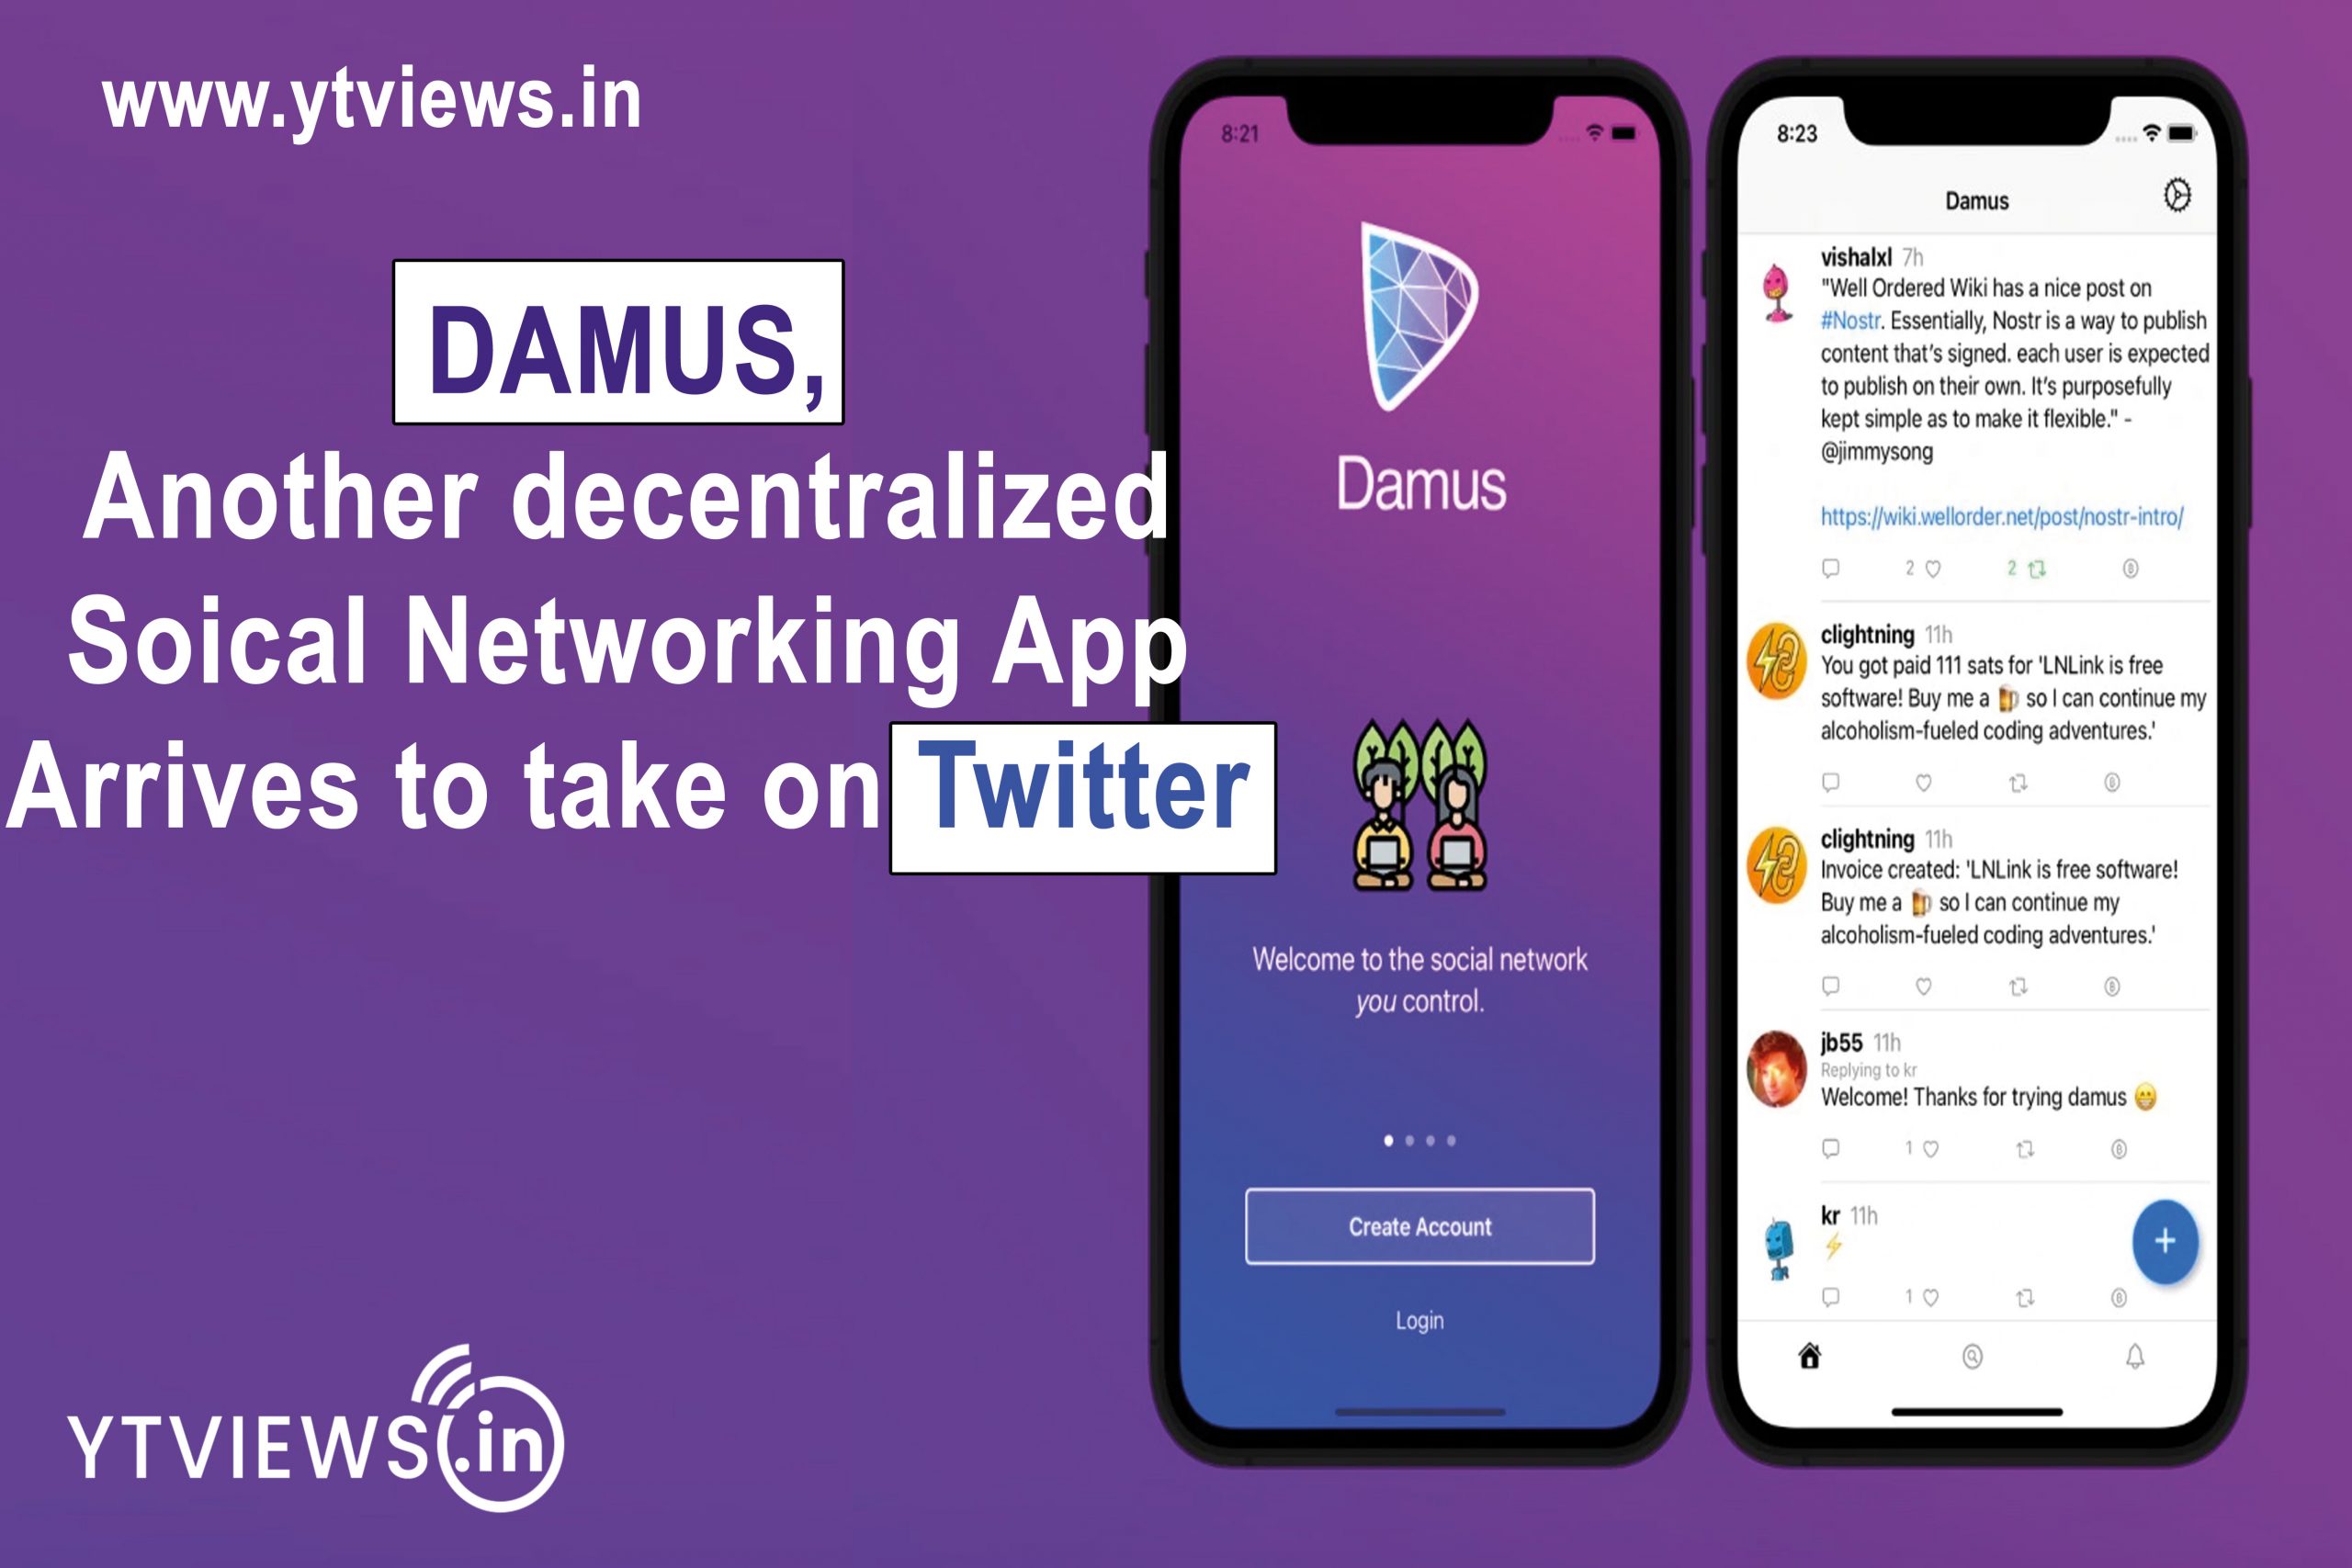 Damus, another decentralized social networking app, arrives to take on Twitter